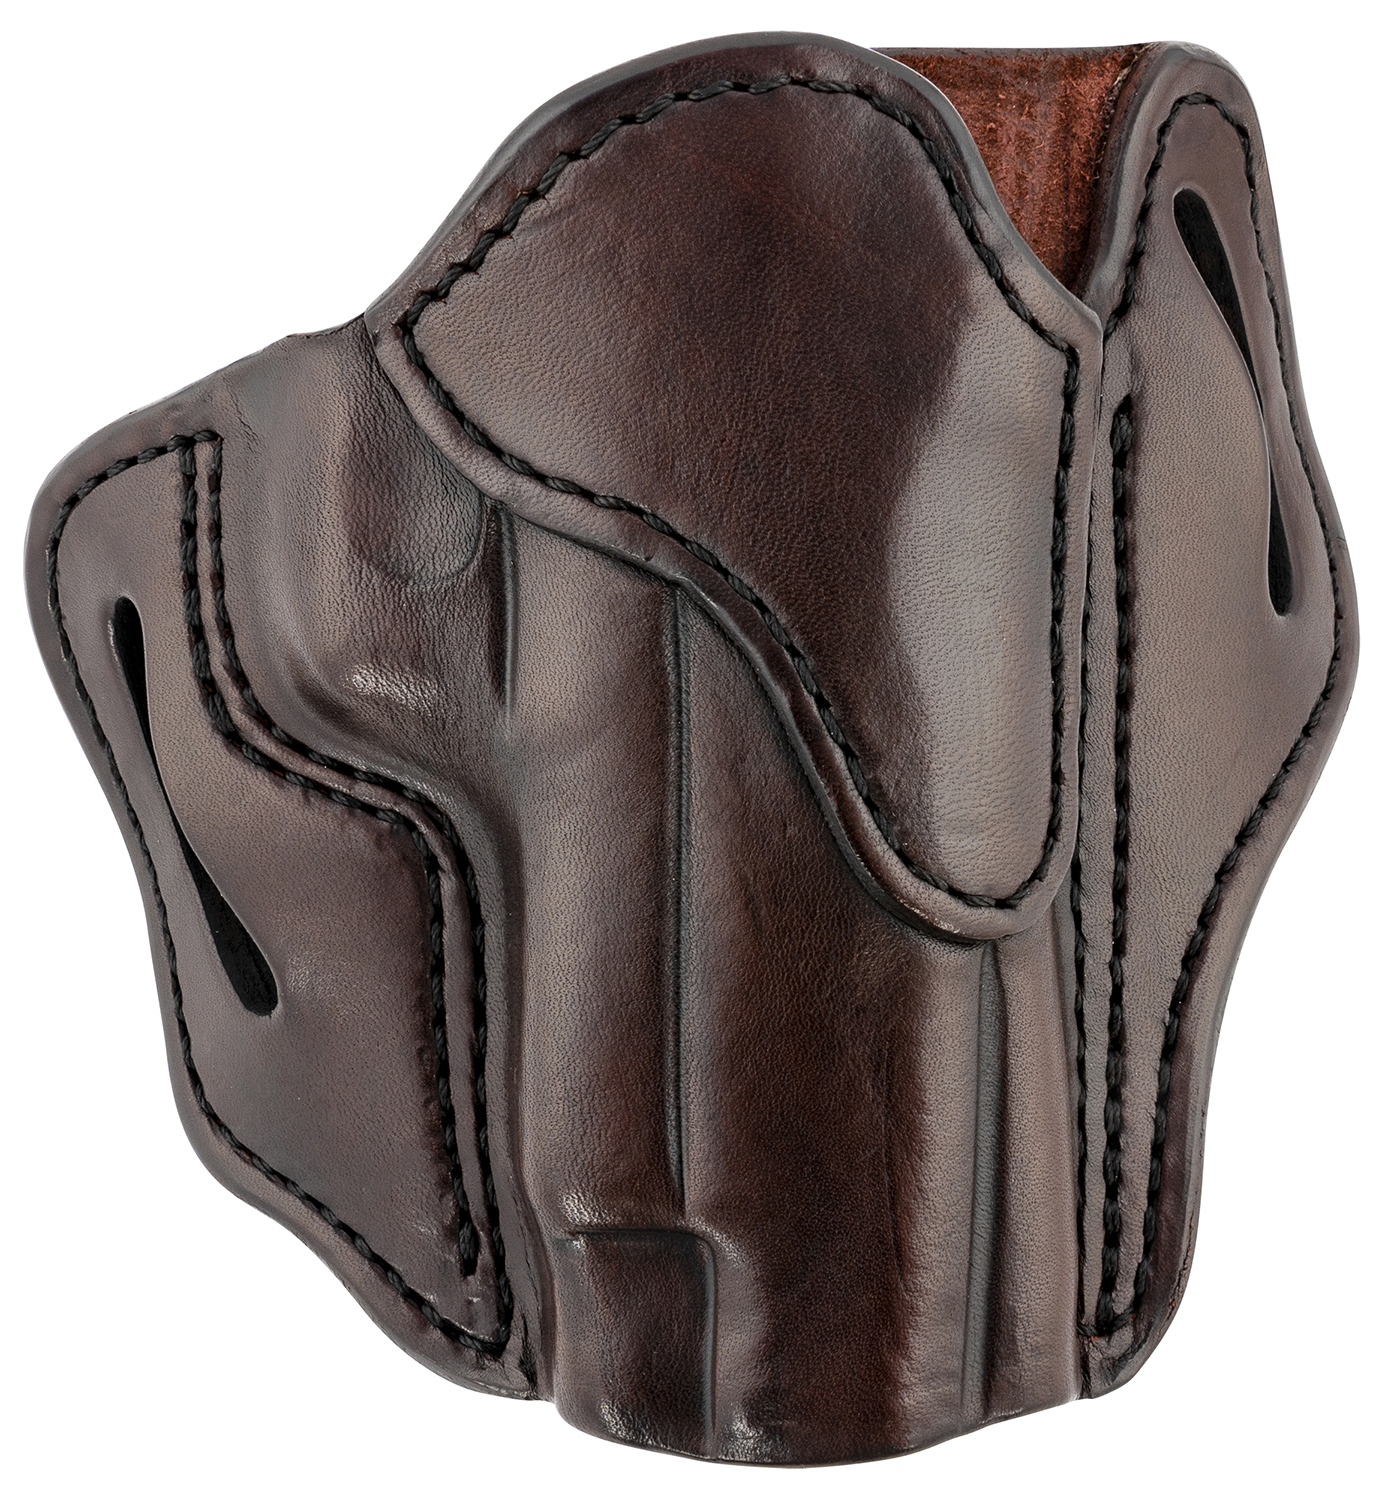 1791 Gunleather ORBH23SBRR BH2.3 Optic Ready OWB Size 2.3 Signature Brown Leather Belt Slide Compatible w/Glock 17/S&W M&P Shield/Walther PPQ  Right Hand